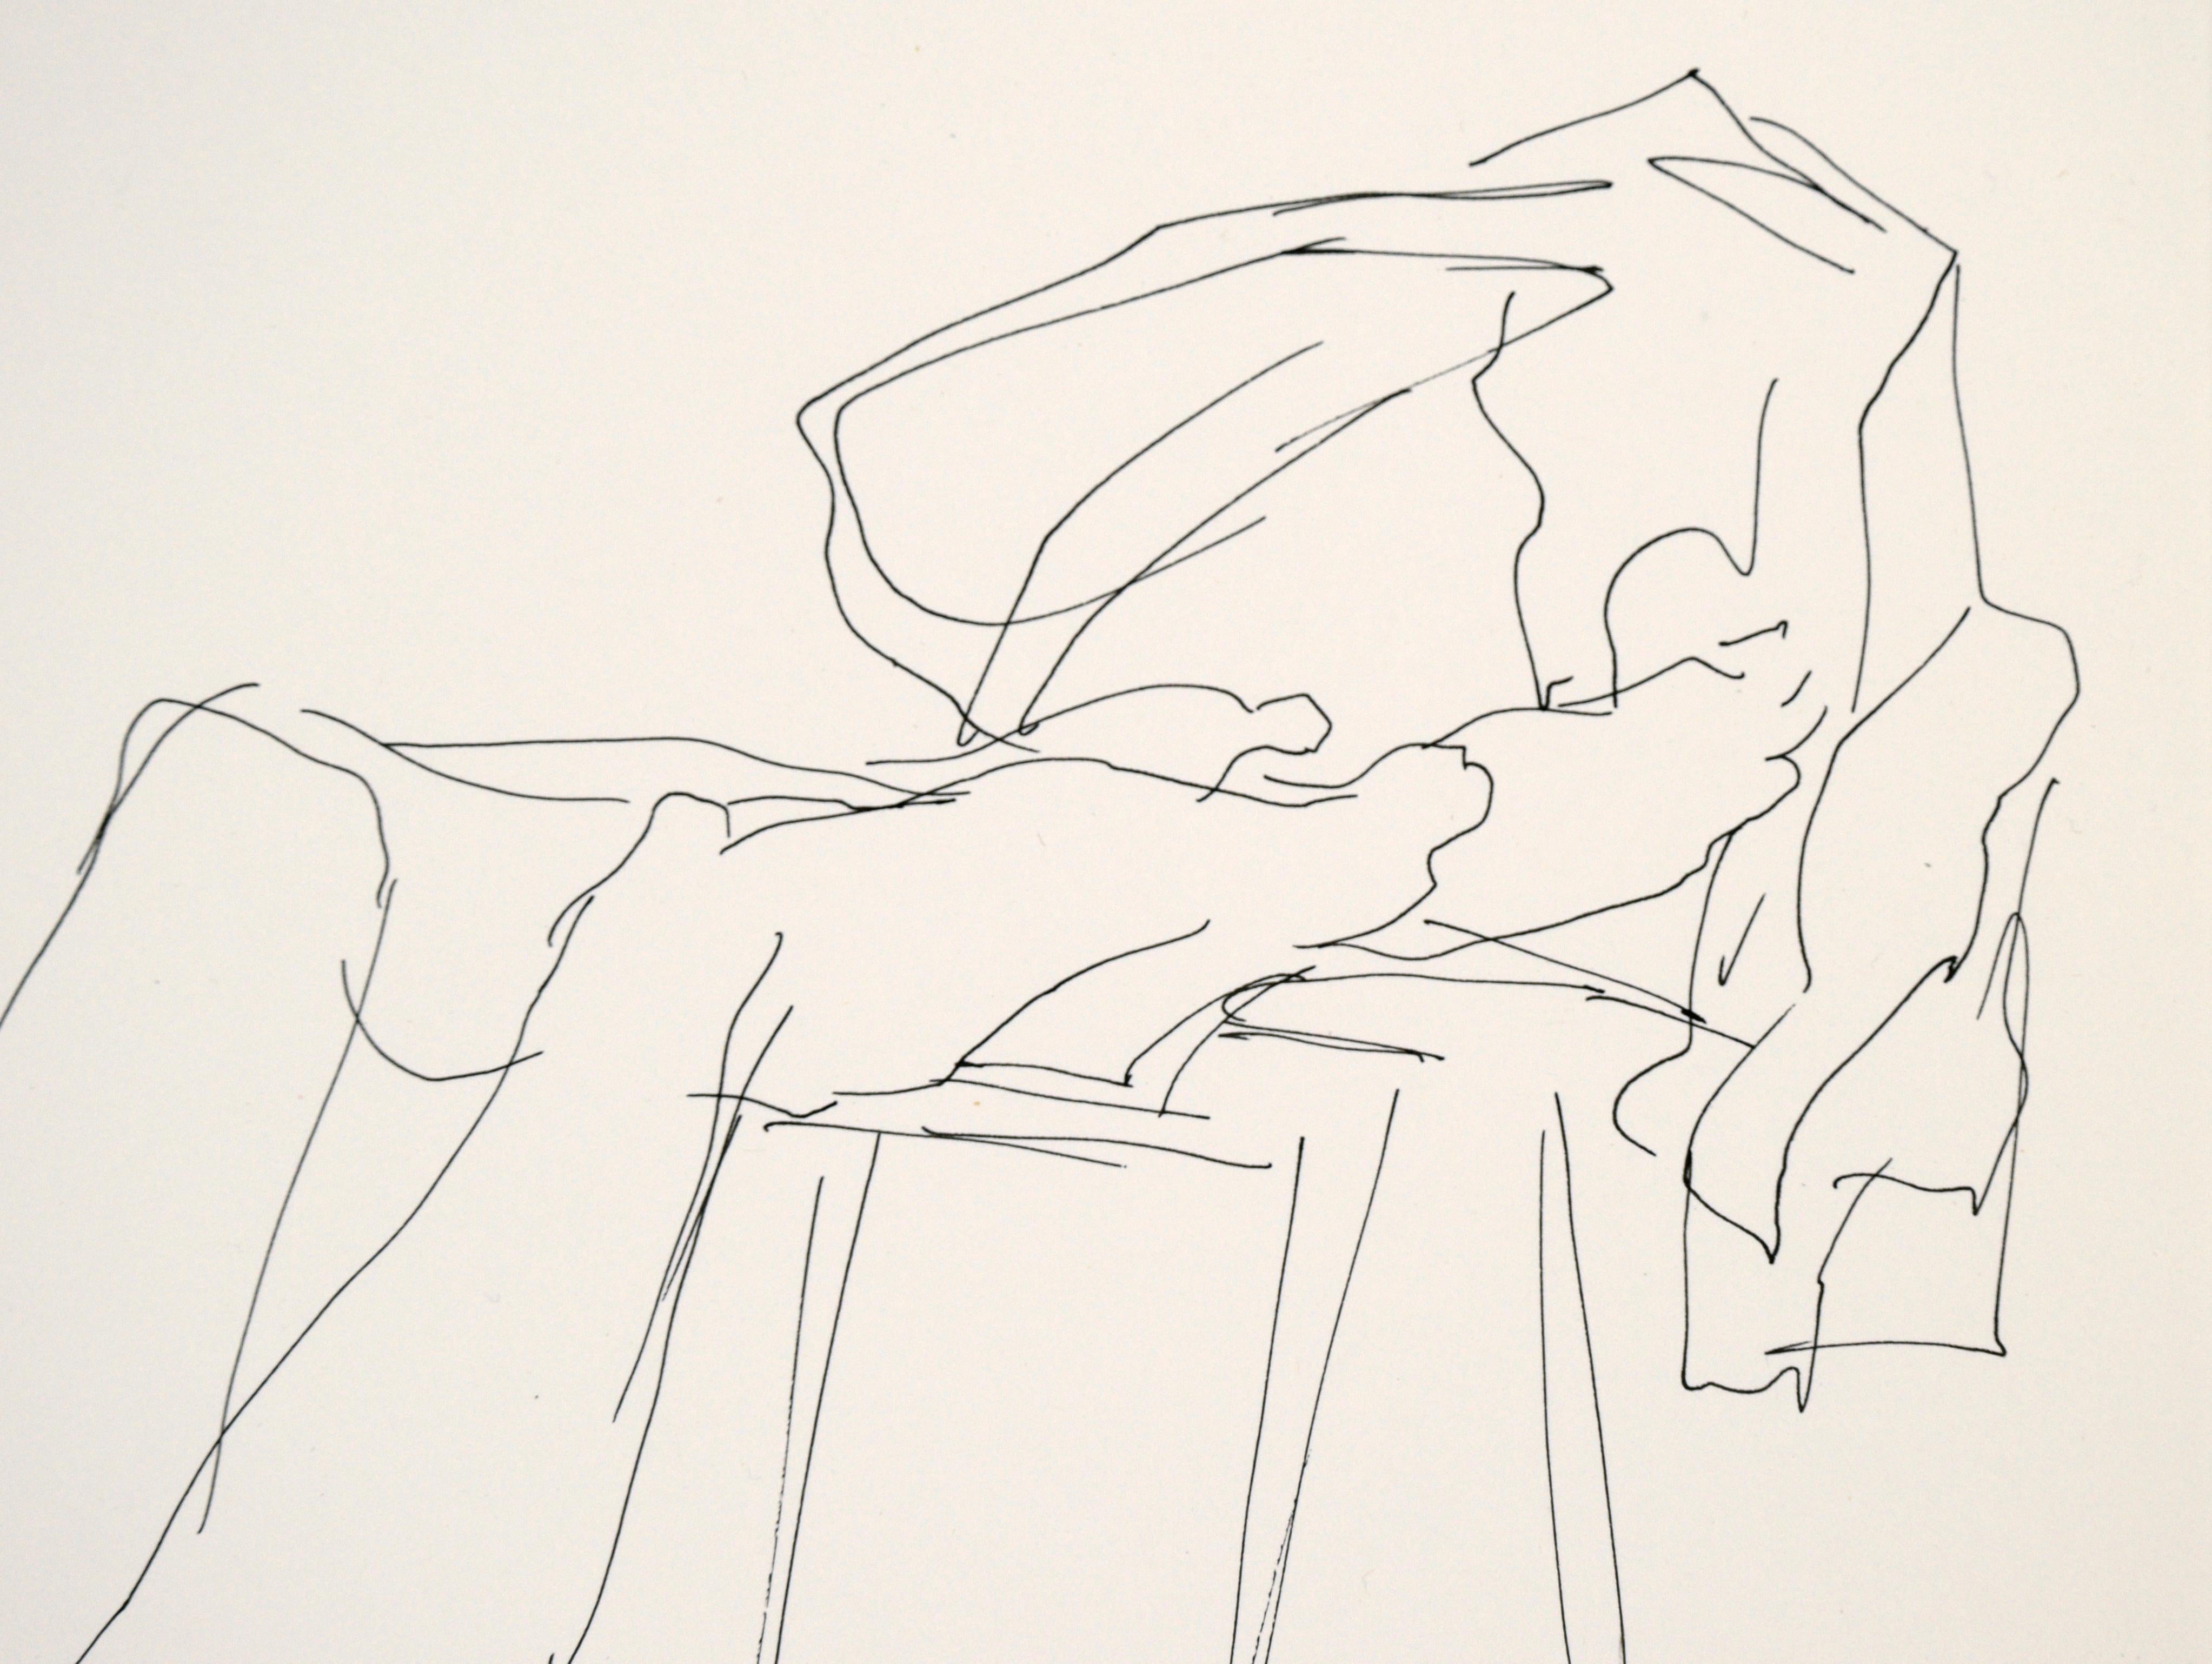 Clean and confident sketch of a nude model by an unknown San Francisco Bay Area artist (20th Century). A woman is lying down on her back, with her arms above her head and legs up on a chair. Draped over the chair is an article of clothing. She is